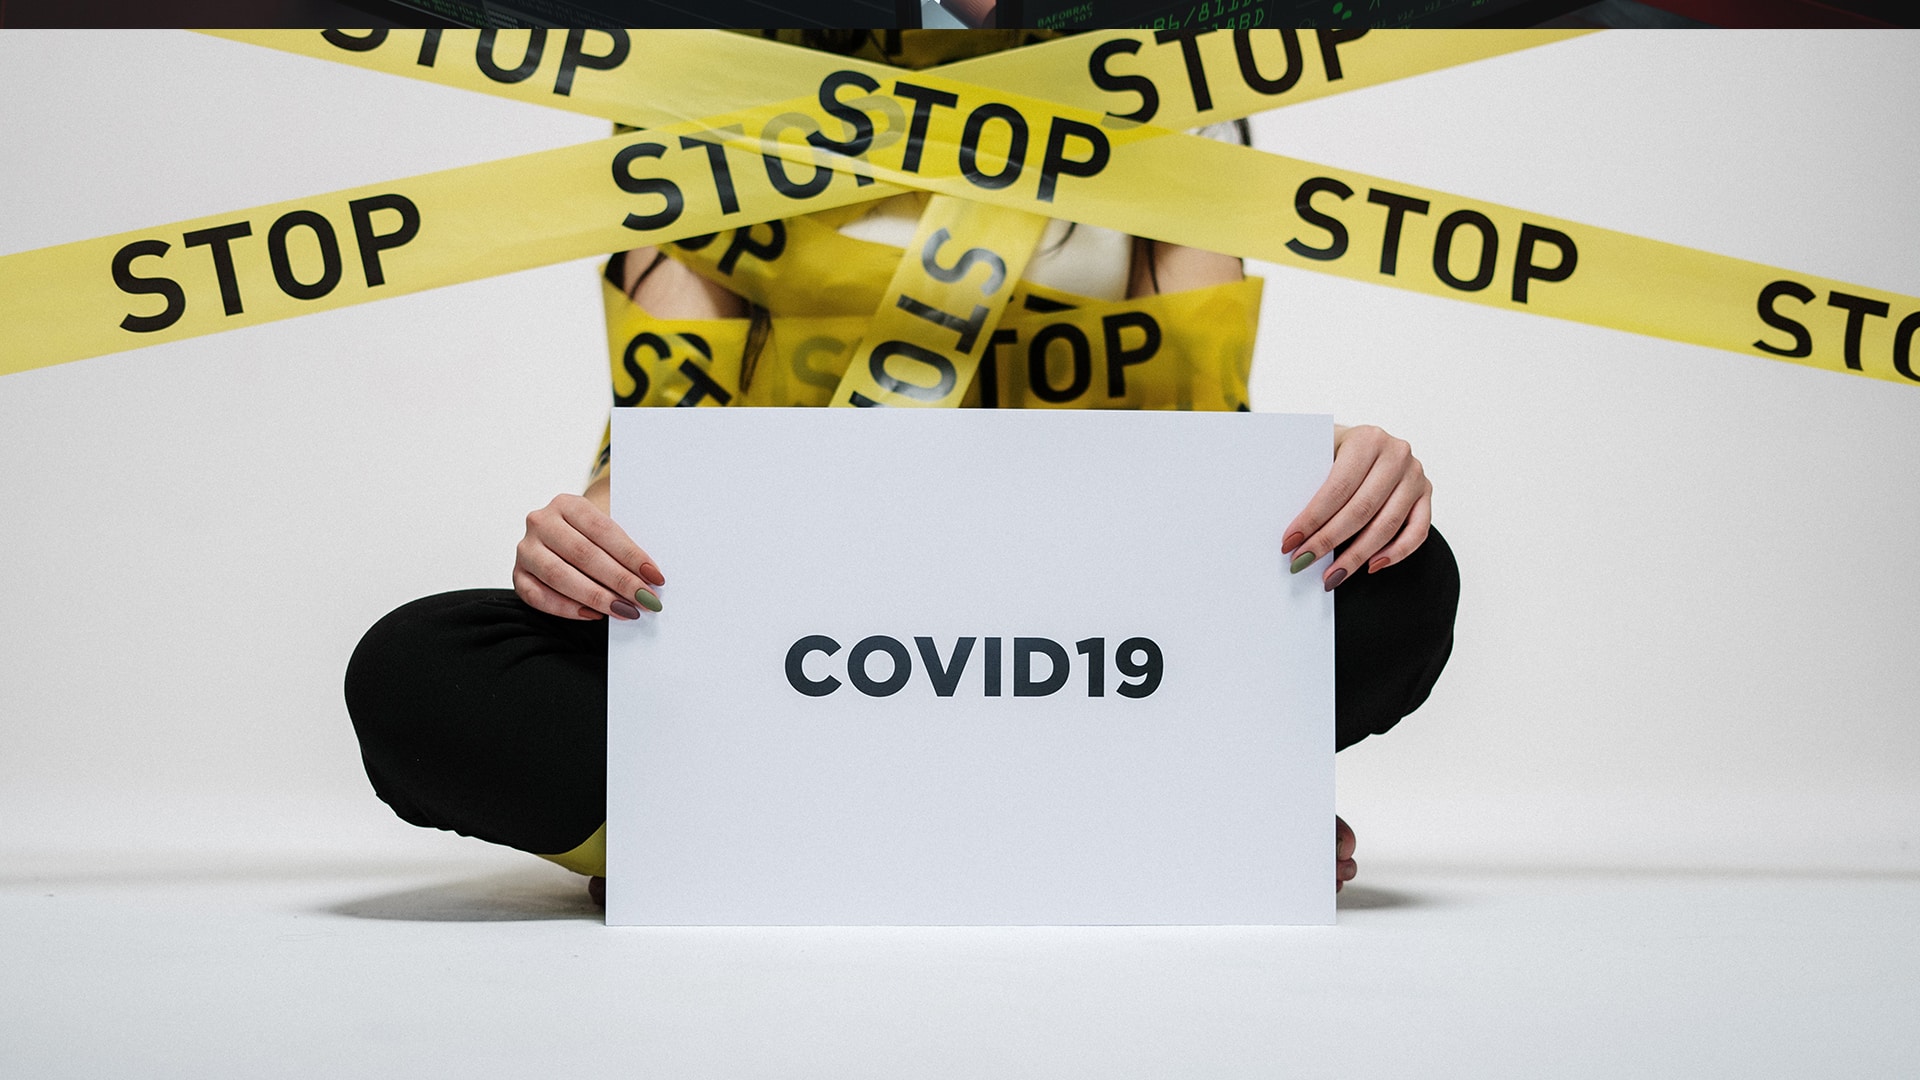 COVID-19 Resources & News